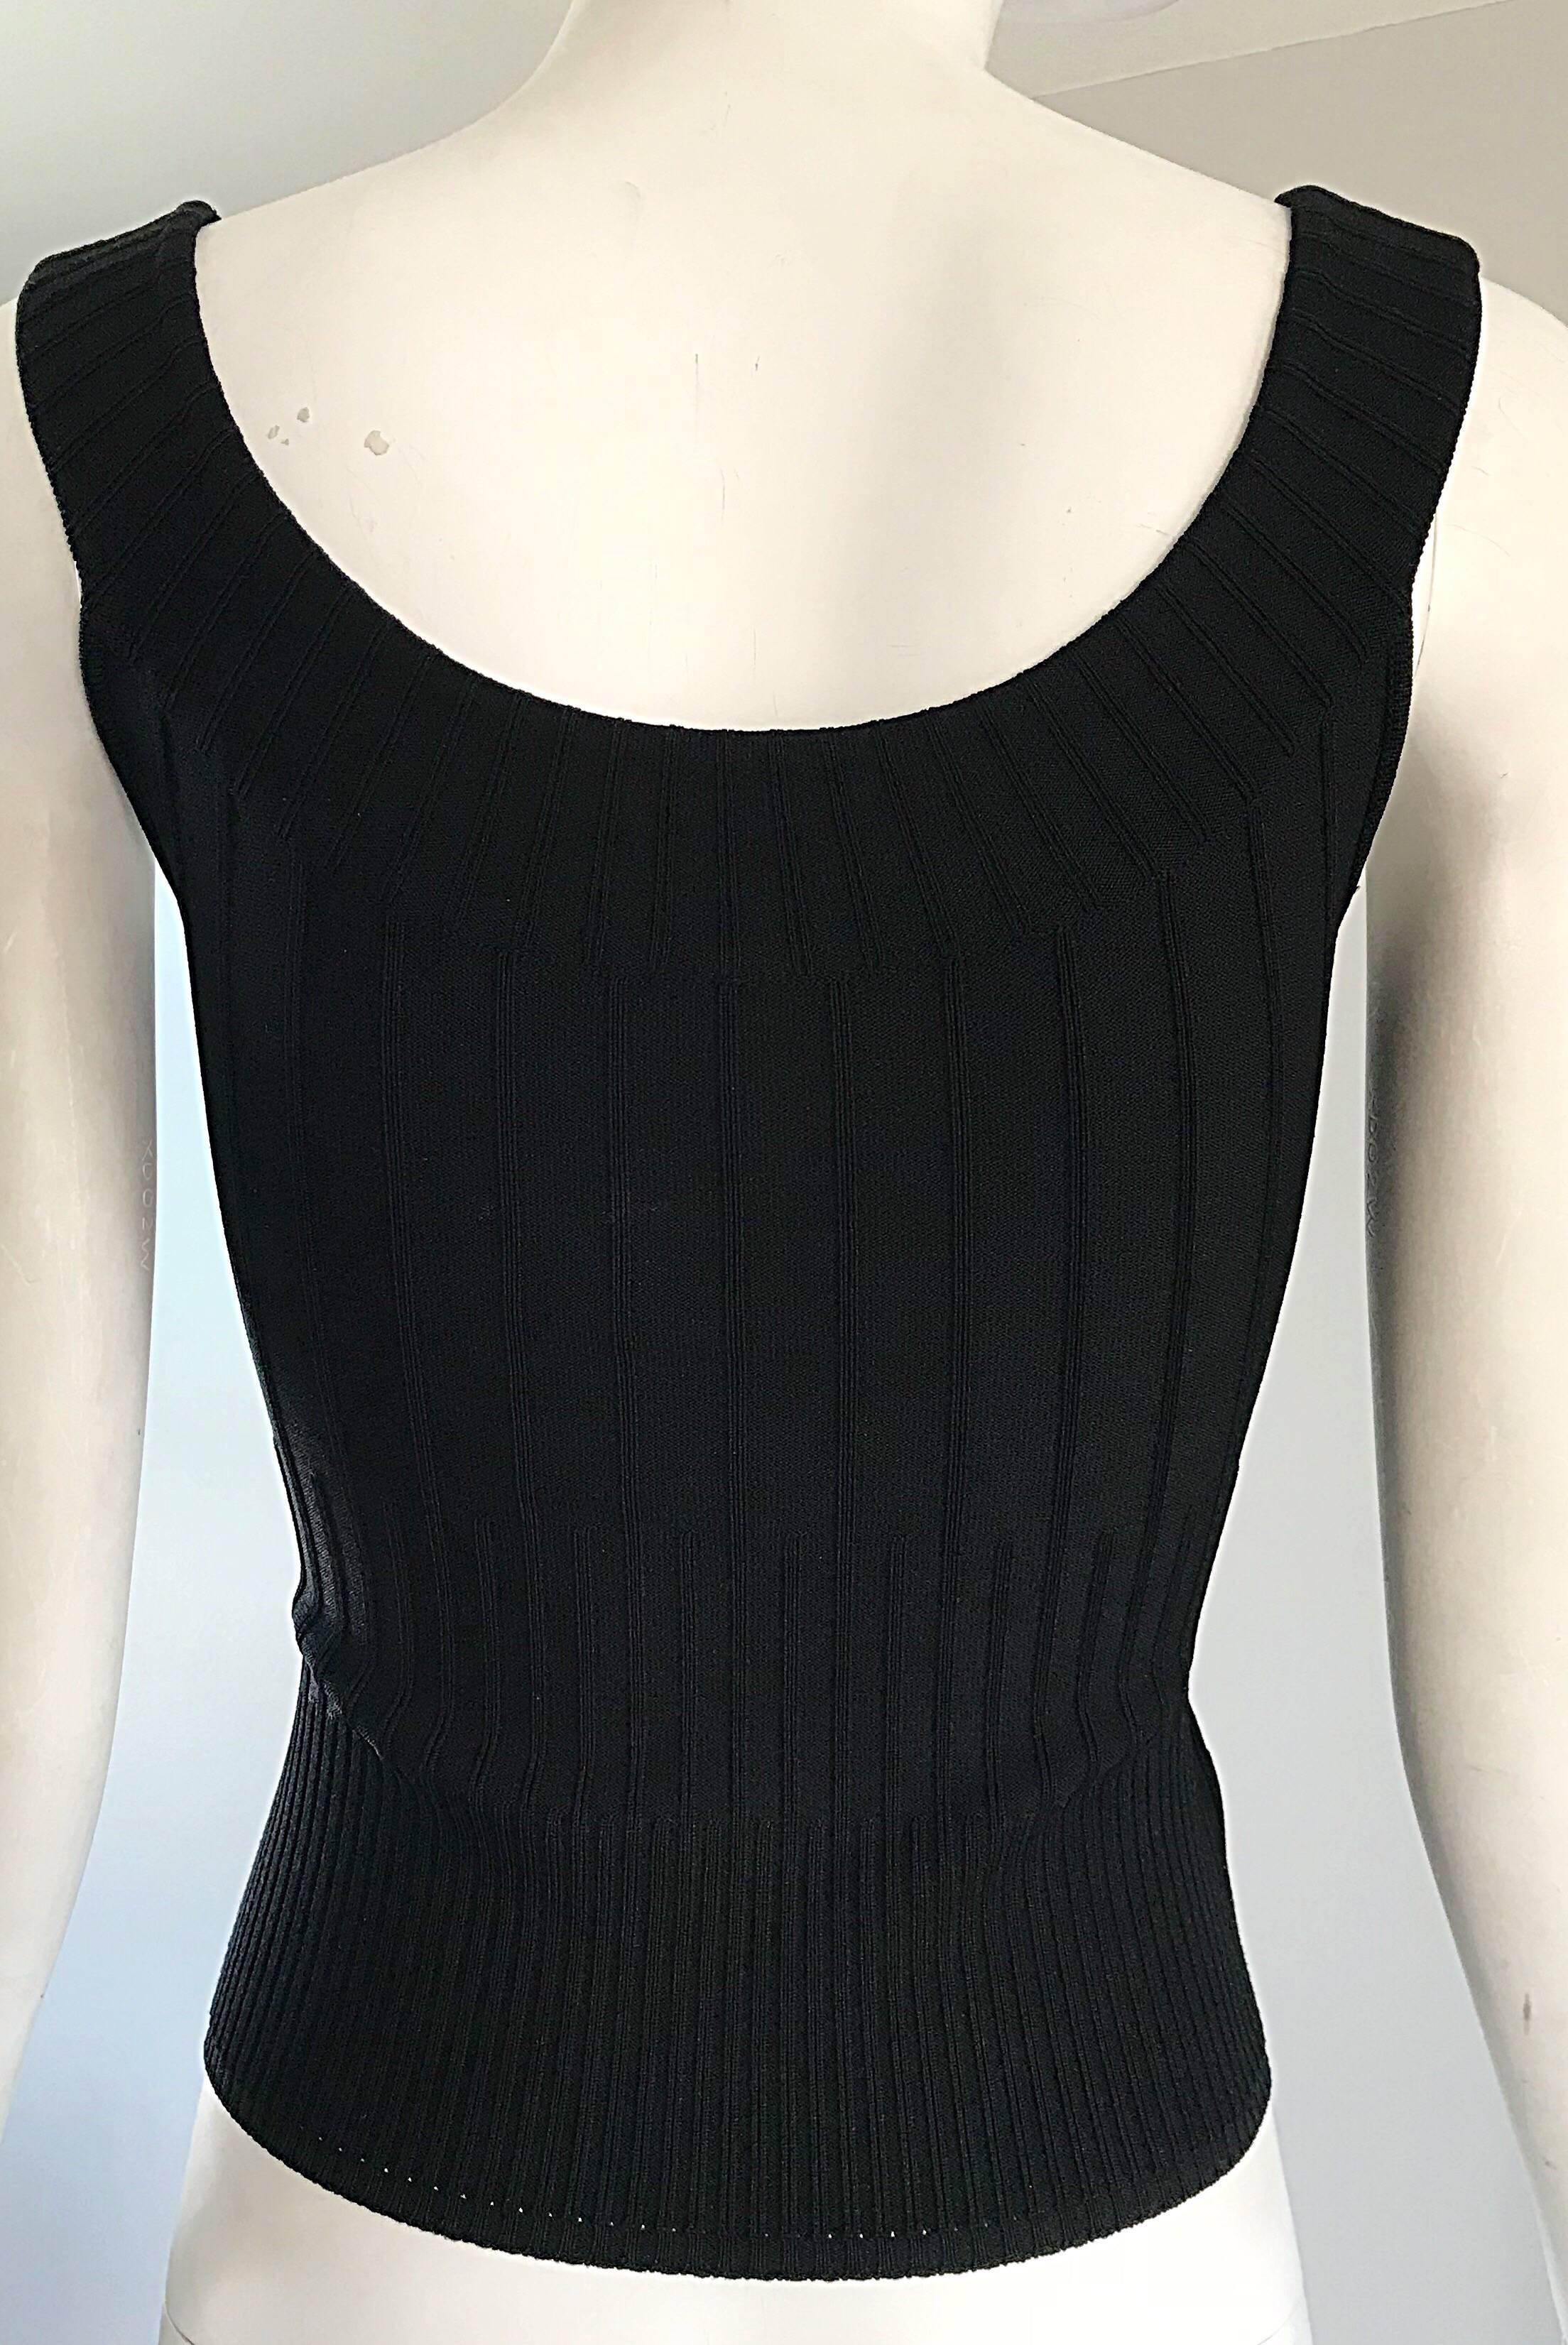 Thierry Mugler Couture 1990 Black Ribbed Sleeveless Vintage 90s Crop Top Shirt en vente 3